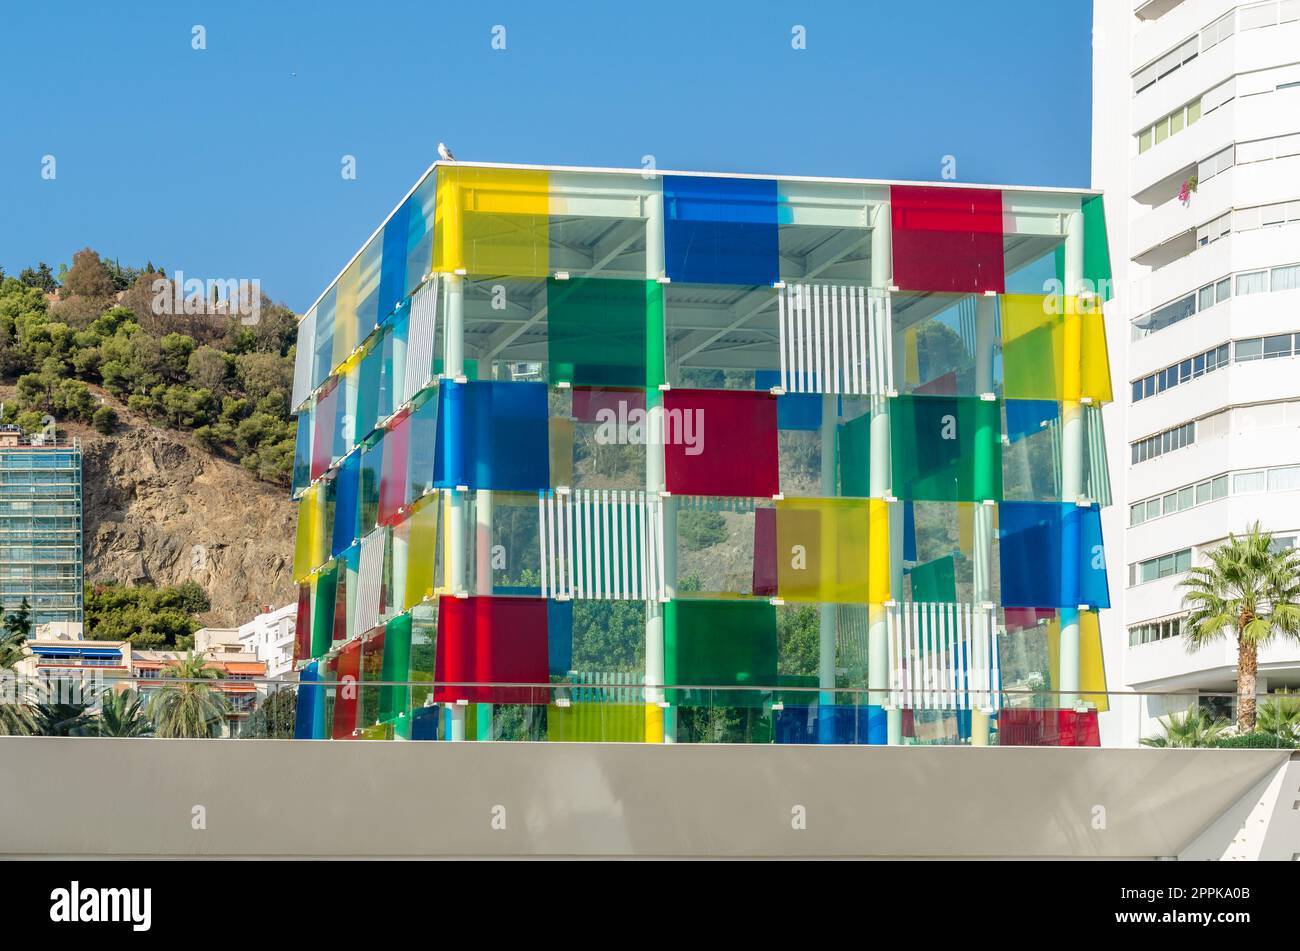 MALAGA, SPAIN - OCTOBER 12, 2021: The Centre Pompidou Malaga, part of the National Center of Art and Culture Georges Pompidou of France, located in the space called El Cubo (The Cube) in Malaga, Spain, inaugurated in 2015 Stock Photo